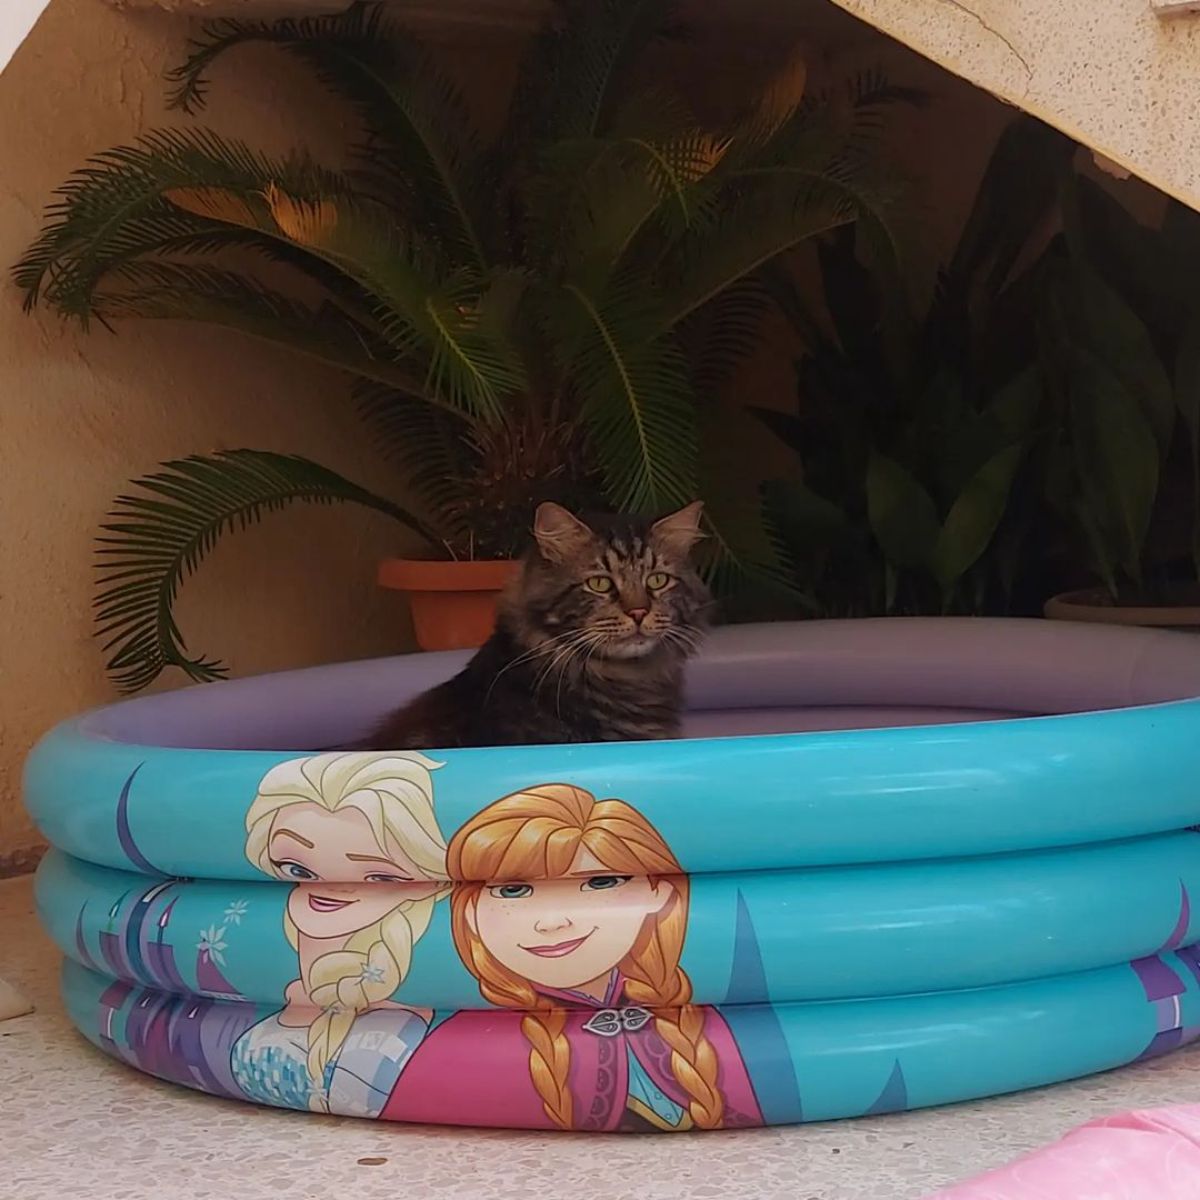 A tabby maine coon sitting in a small pool.